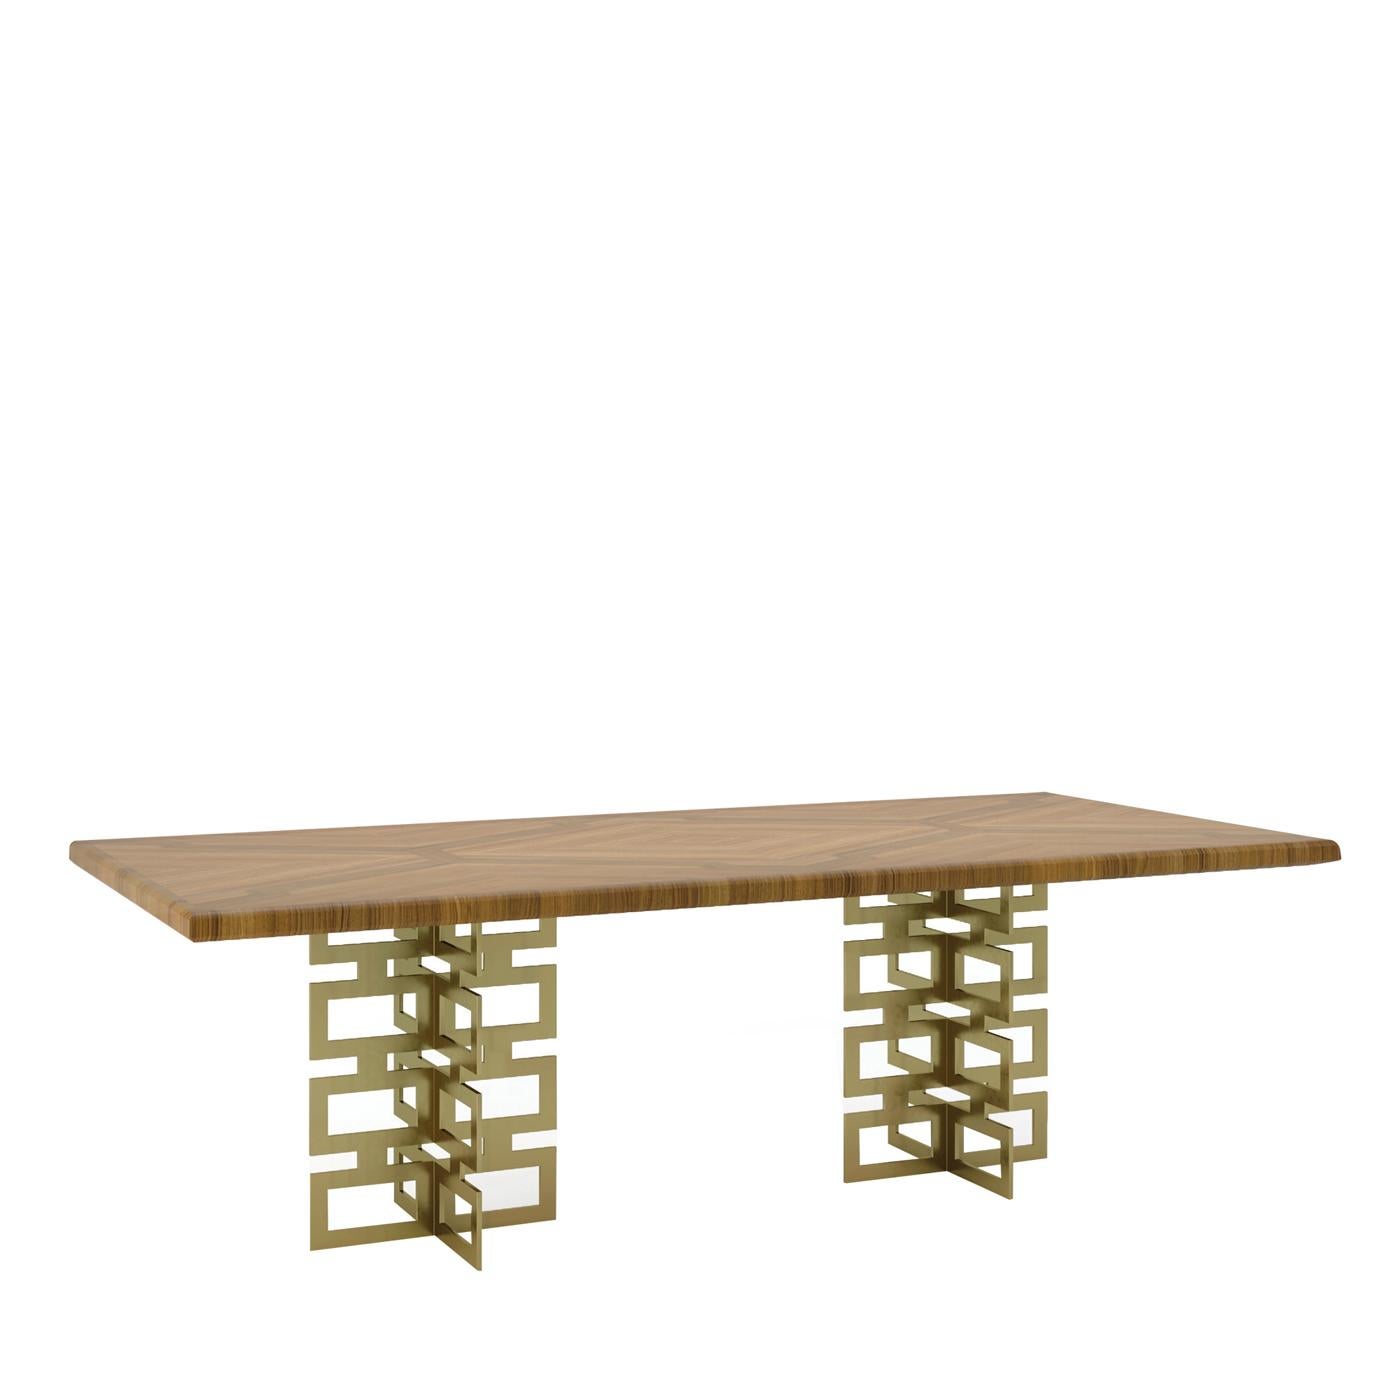 Masterfully evoking Hollywood's seductive flair, this majestic dining table displays a sturdy rectangular top in inlaid wood, which is also available in different wood finishes and lacquers or beveled glass. Two support structures made of